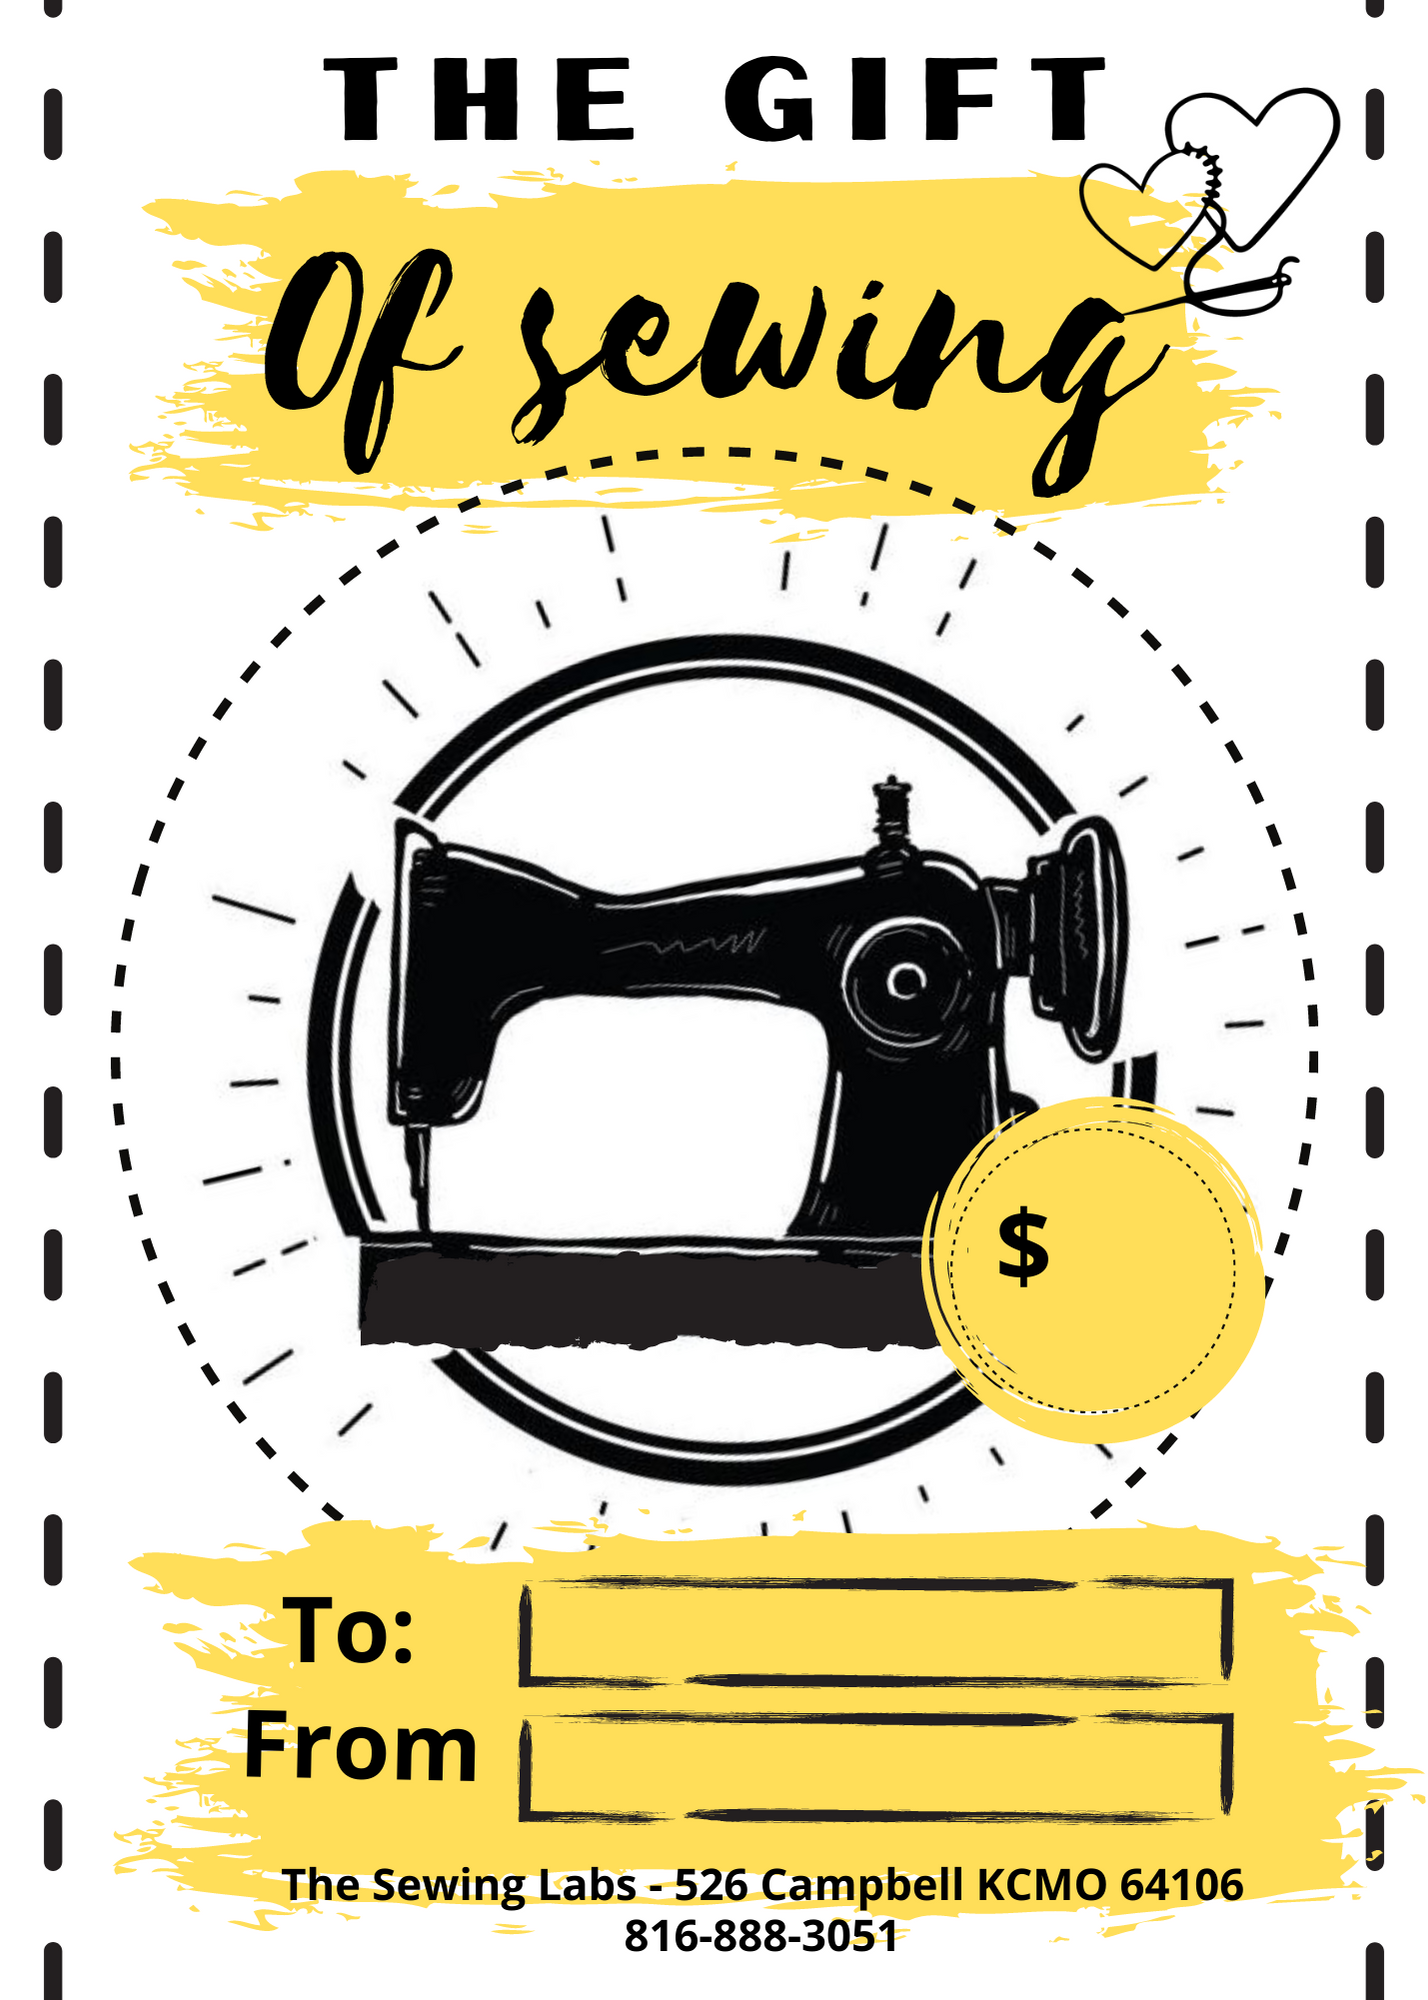 The Gift of Sewing - Gift Certificate - $50